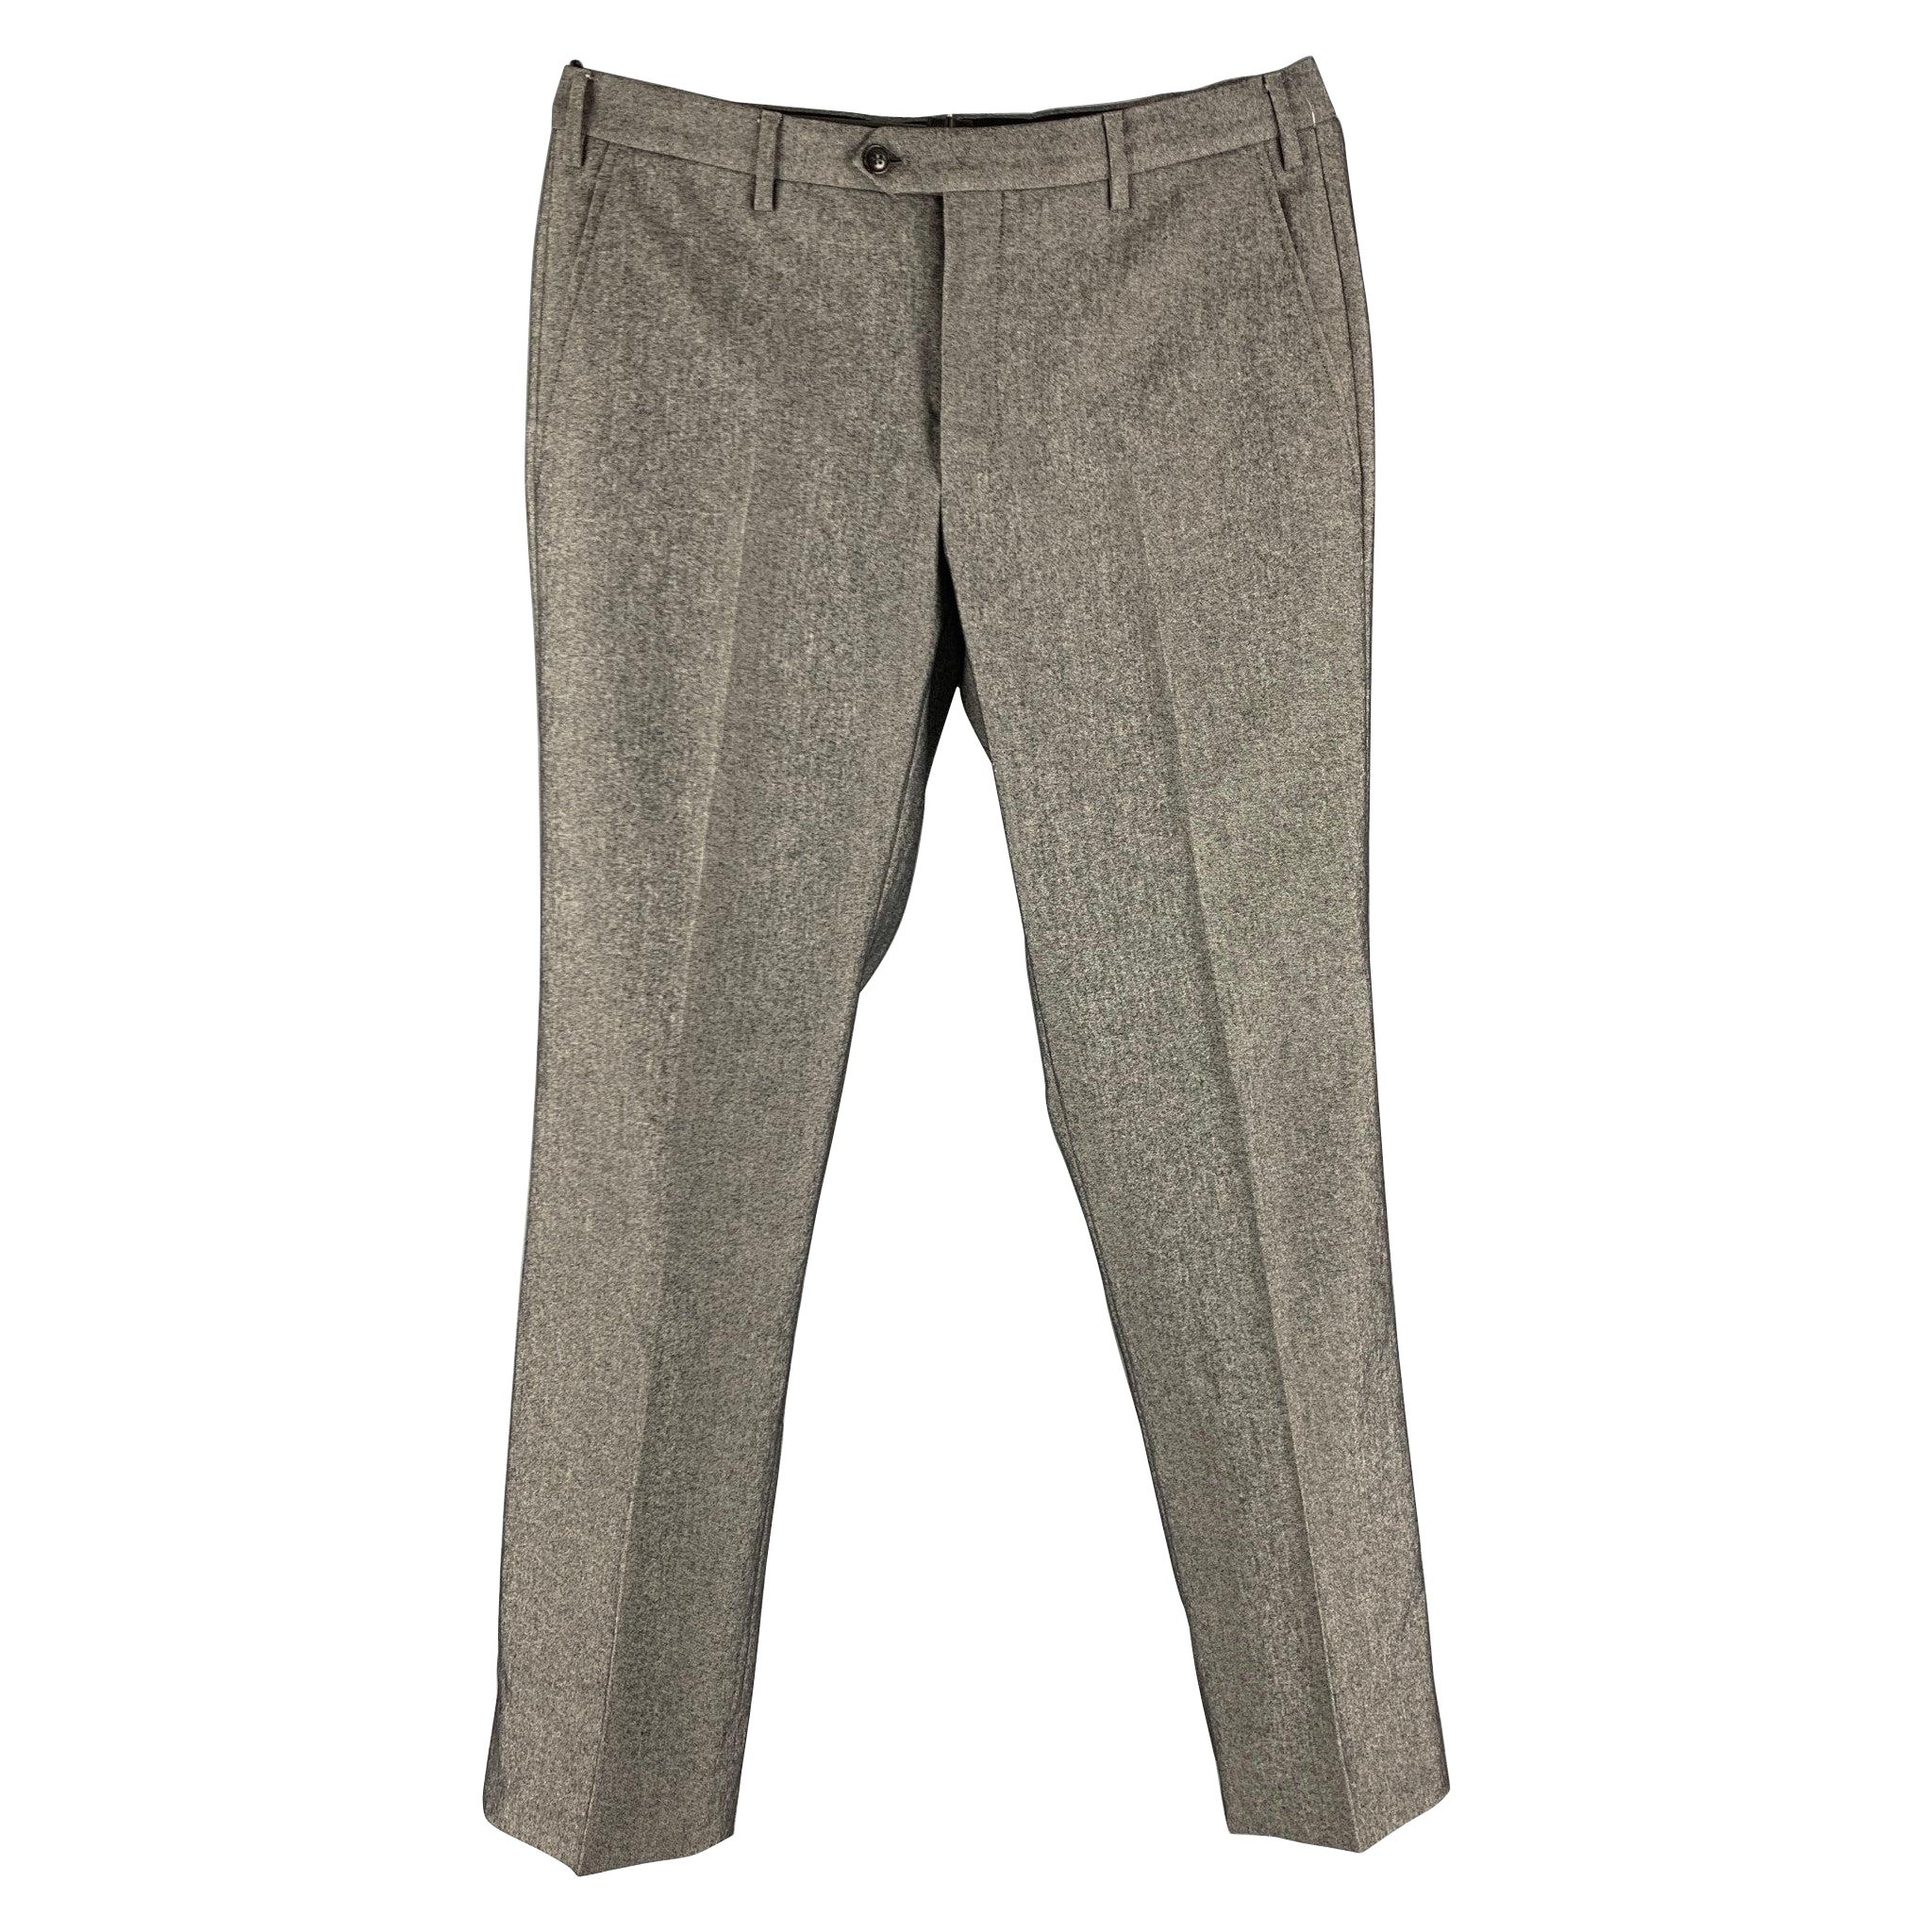 GIORGIO ARMANI Size 34 Grey Heather Wool Blend Zip Fly Dress Pants For Sale